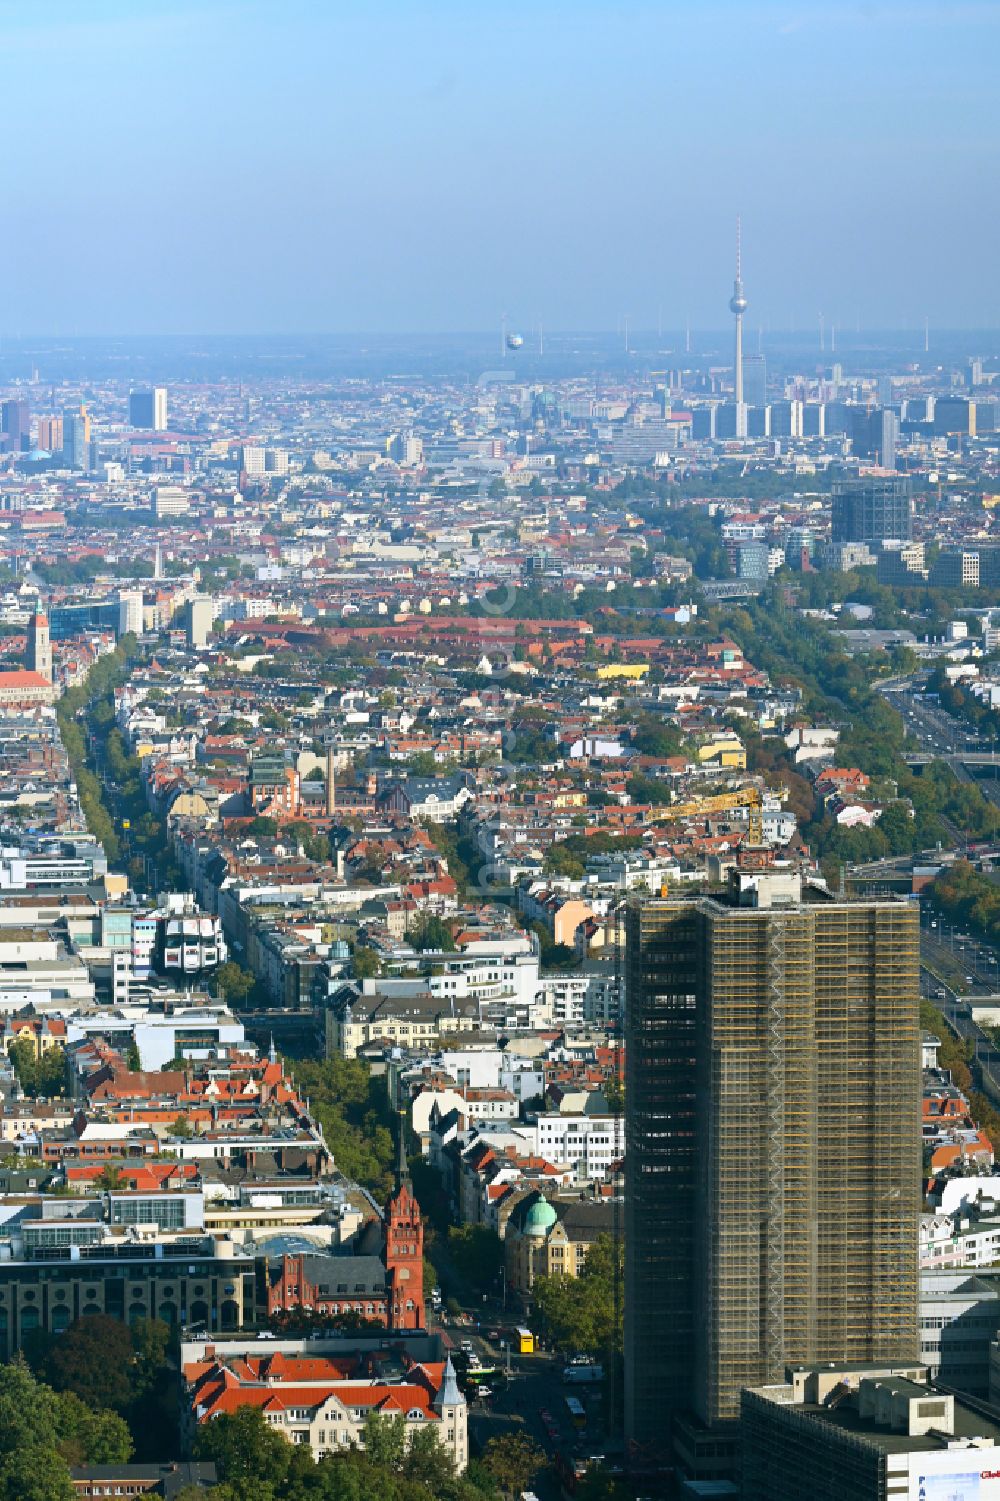 Aerial photograph Berlin - Construction site for the reconstruction of the high-rise building and building complex Steglitzer Kreisel - UBERLIN residential tower on Schlossstrasse in the district of Steglitz in Berlin